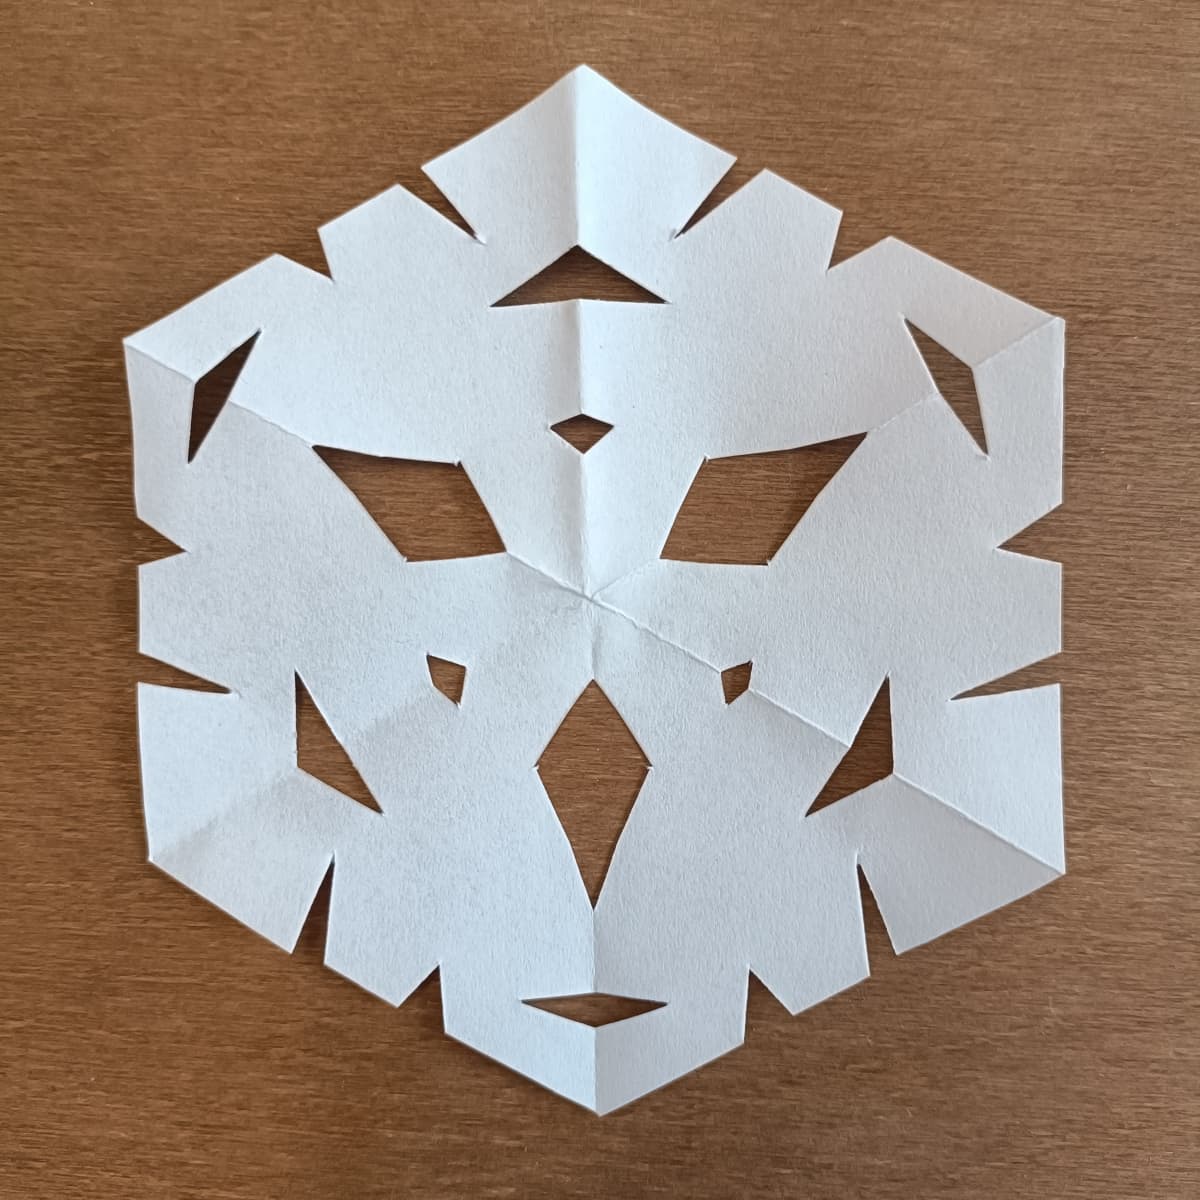 Drawing a Snowflake Based on an Algorithm - JDaniel4s Mom